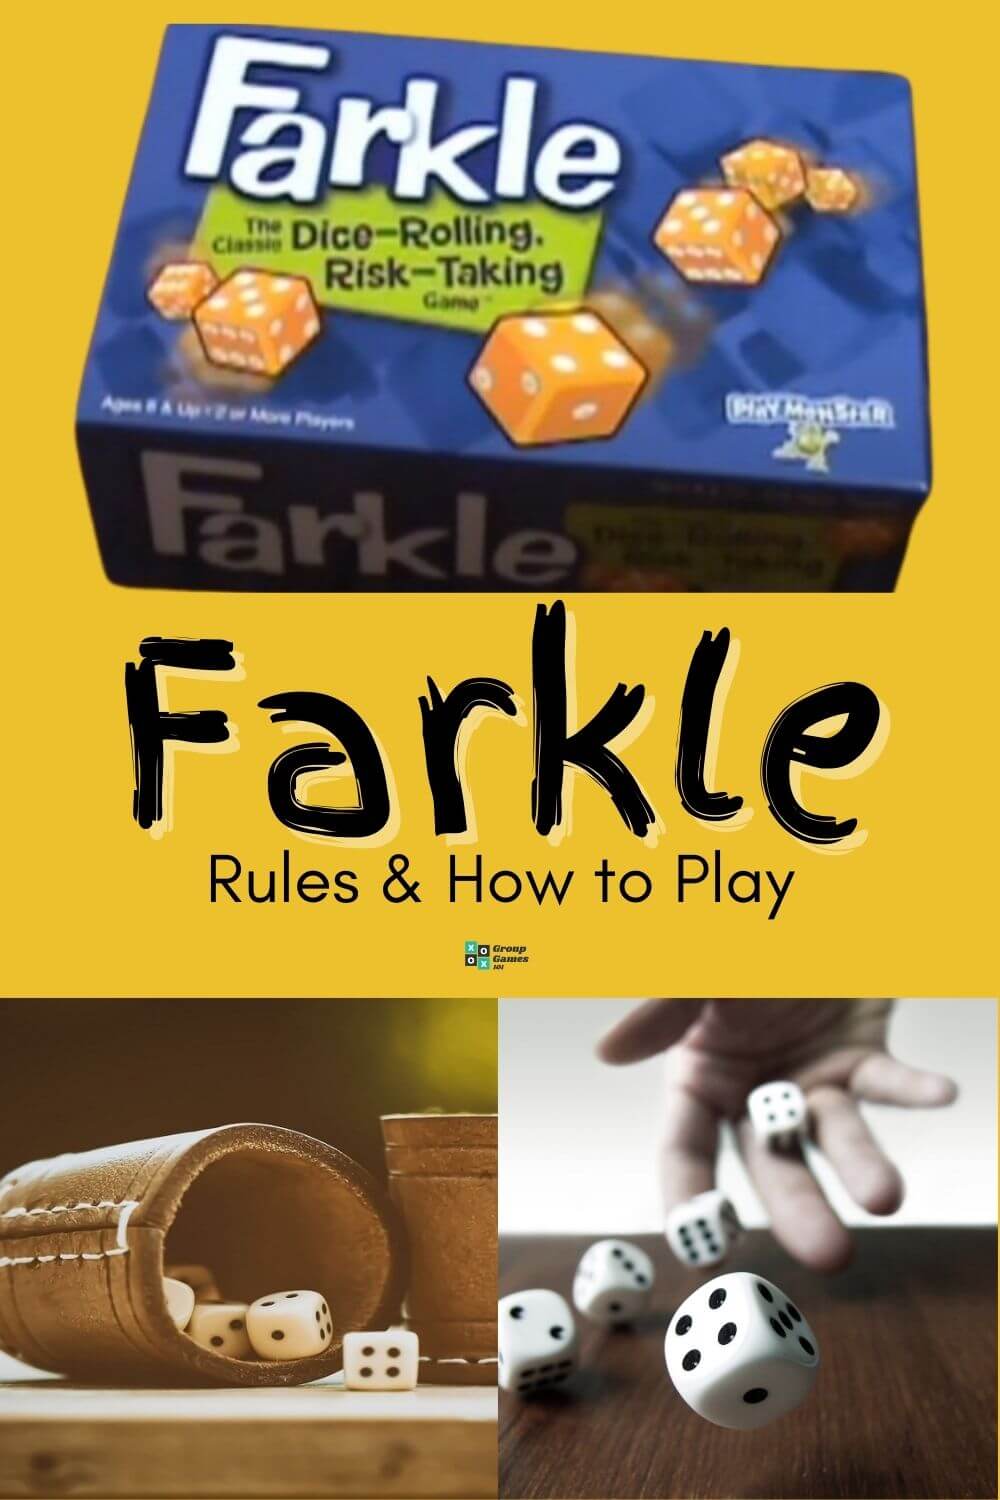 rules for farkle with 6 dice